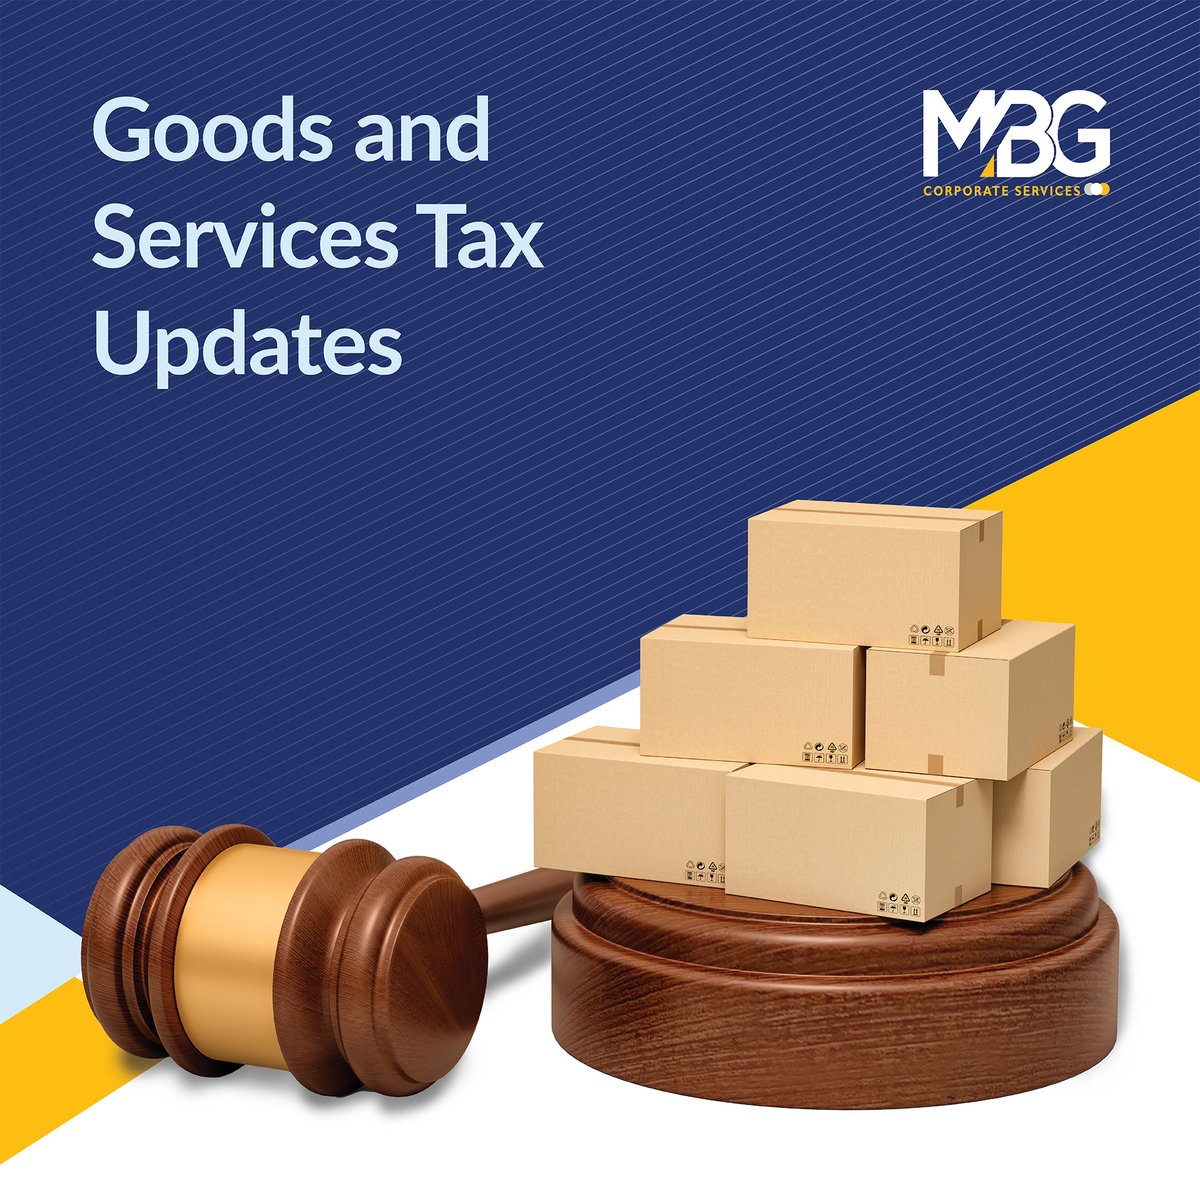 Check out the latest Goods and Services Tax Updates in India where the recent High Court judgements are in favour of the Assessee.

Read on to know more lnkd.in/d4buxg3c

#mbg #india #gst #indirecttax #update #taxupdate